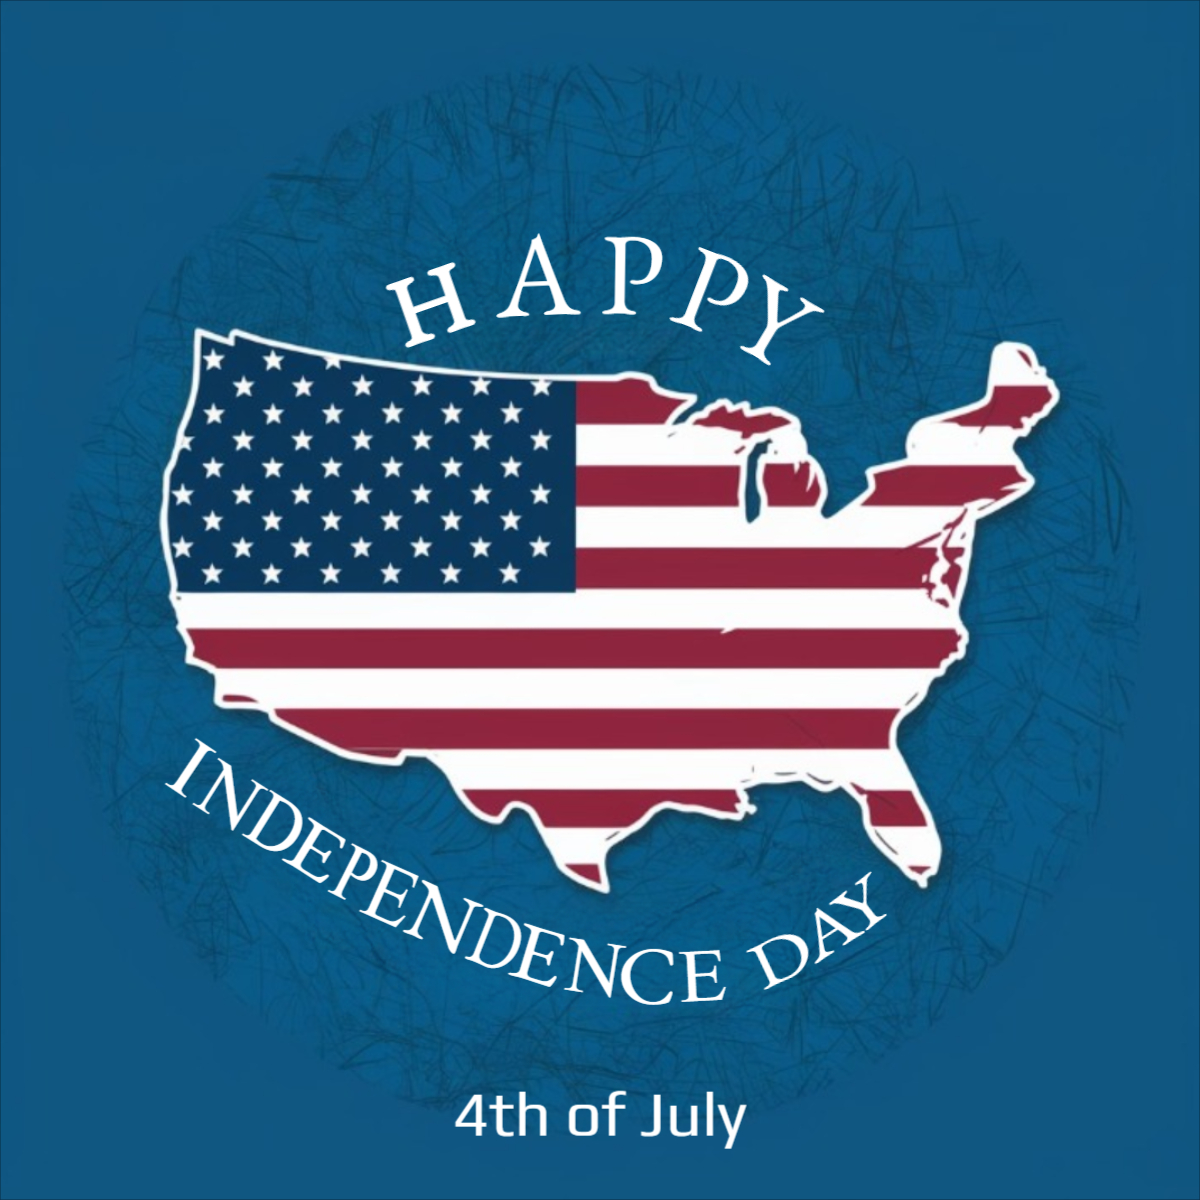 Illustration America Independence Day 4th july happy independence day